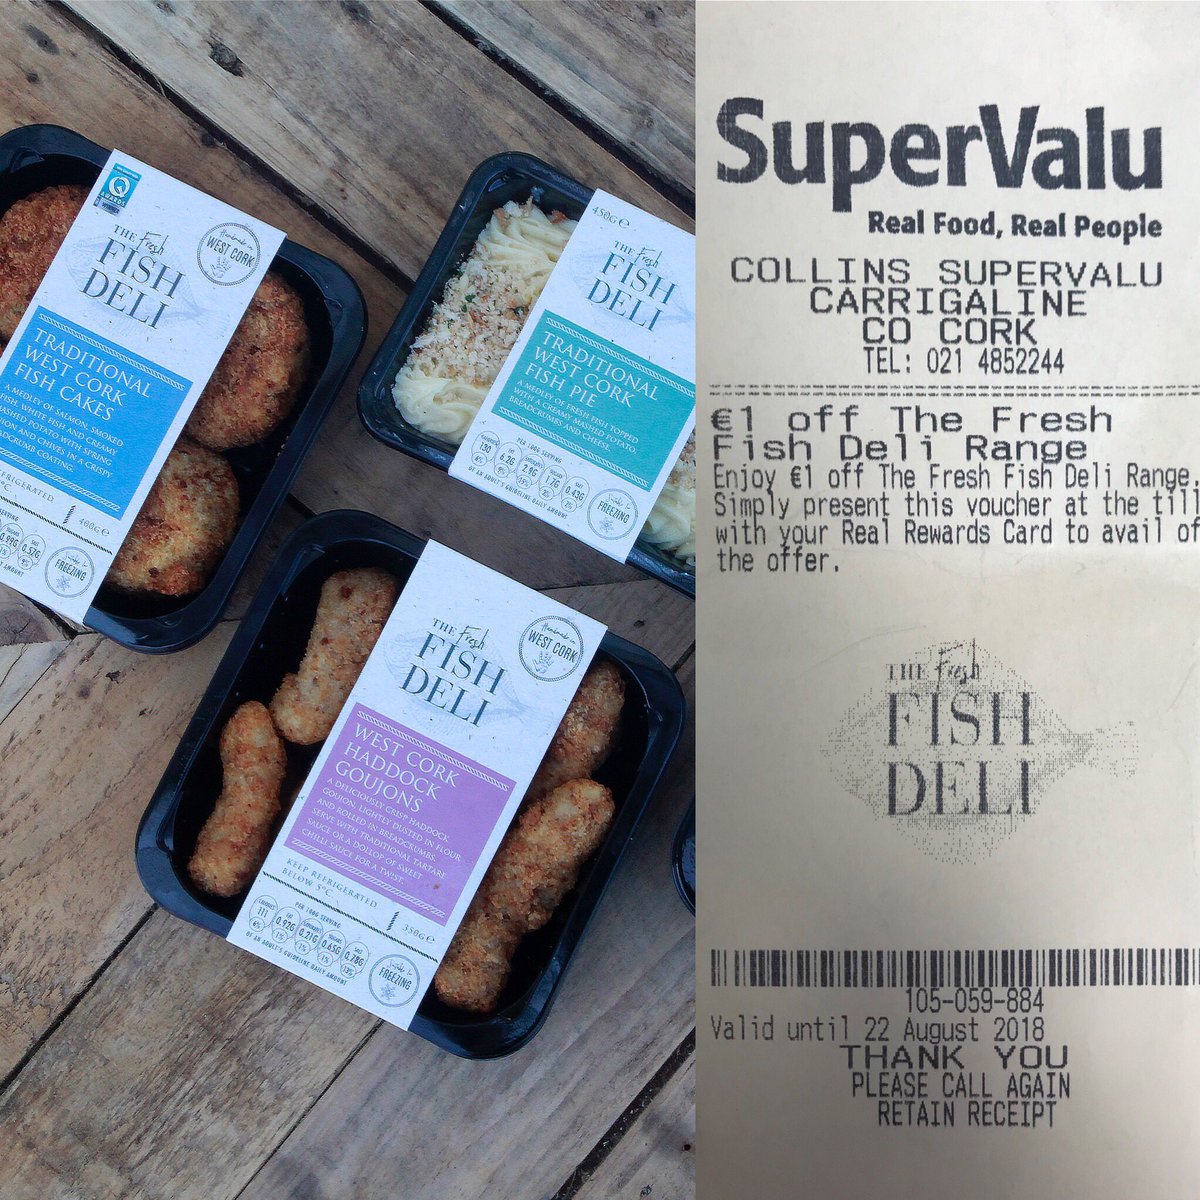 Get down to your local @SuperValuIRL store & purchase any #readymeal or #convenience product and receive a voucher for €1 off your next @the_fresh_fish_deli purchase. #localsuppliers #FoodAcademy #stockupnow